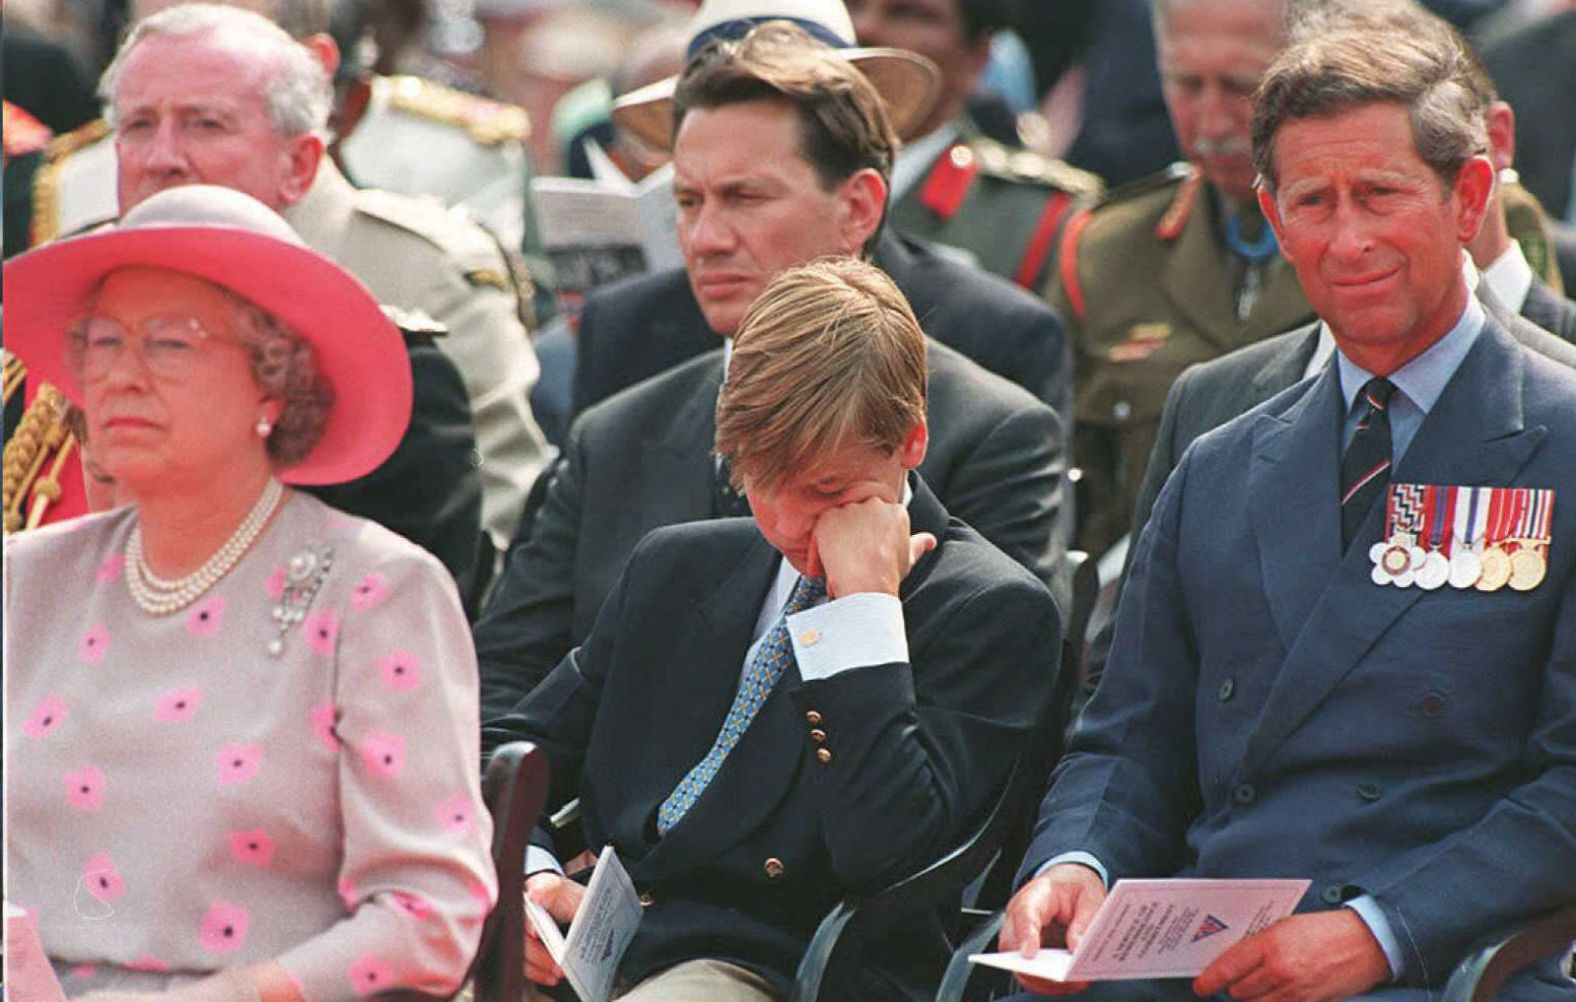 Queen Elizabeth II, Prince William and Prince Charles attend a service commemorating V-J Day outside Buckingham Palace in 1995.